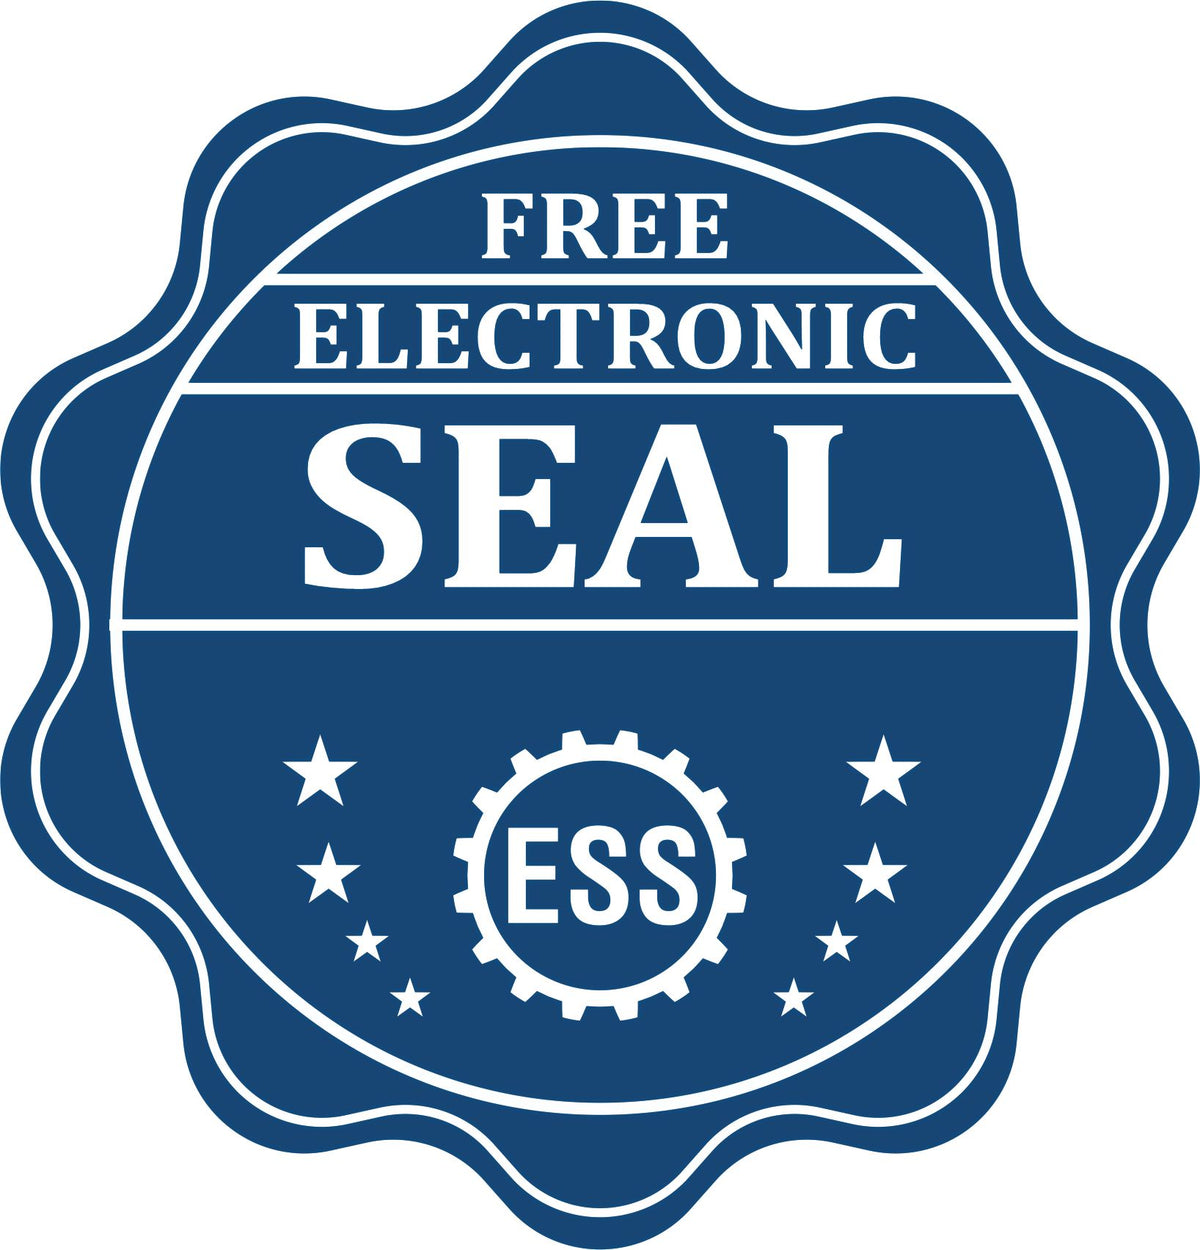 A badge showing a free electronic seal for the Hybrid Maine Architect Seal with stars and the ESS gear on the emblem.